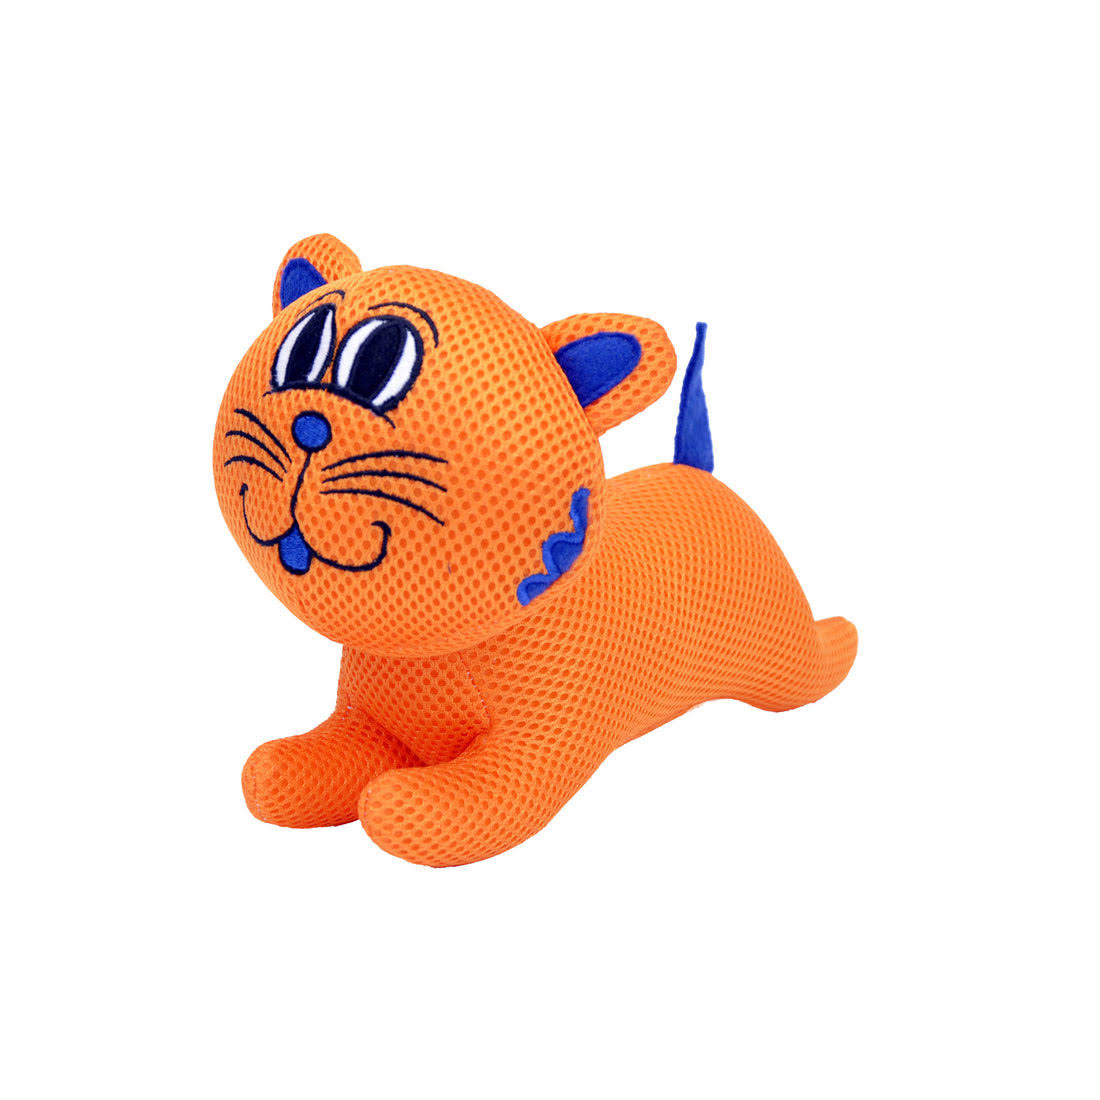 Rascals Mighty Mates Mesh Dog Toy, Calley Cat, 9"